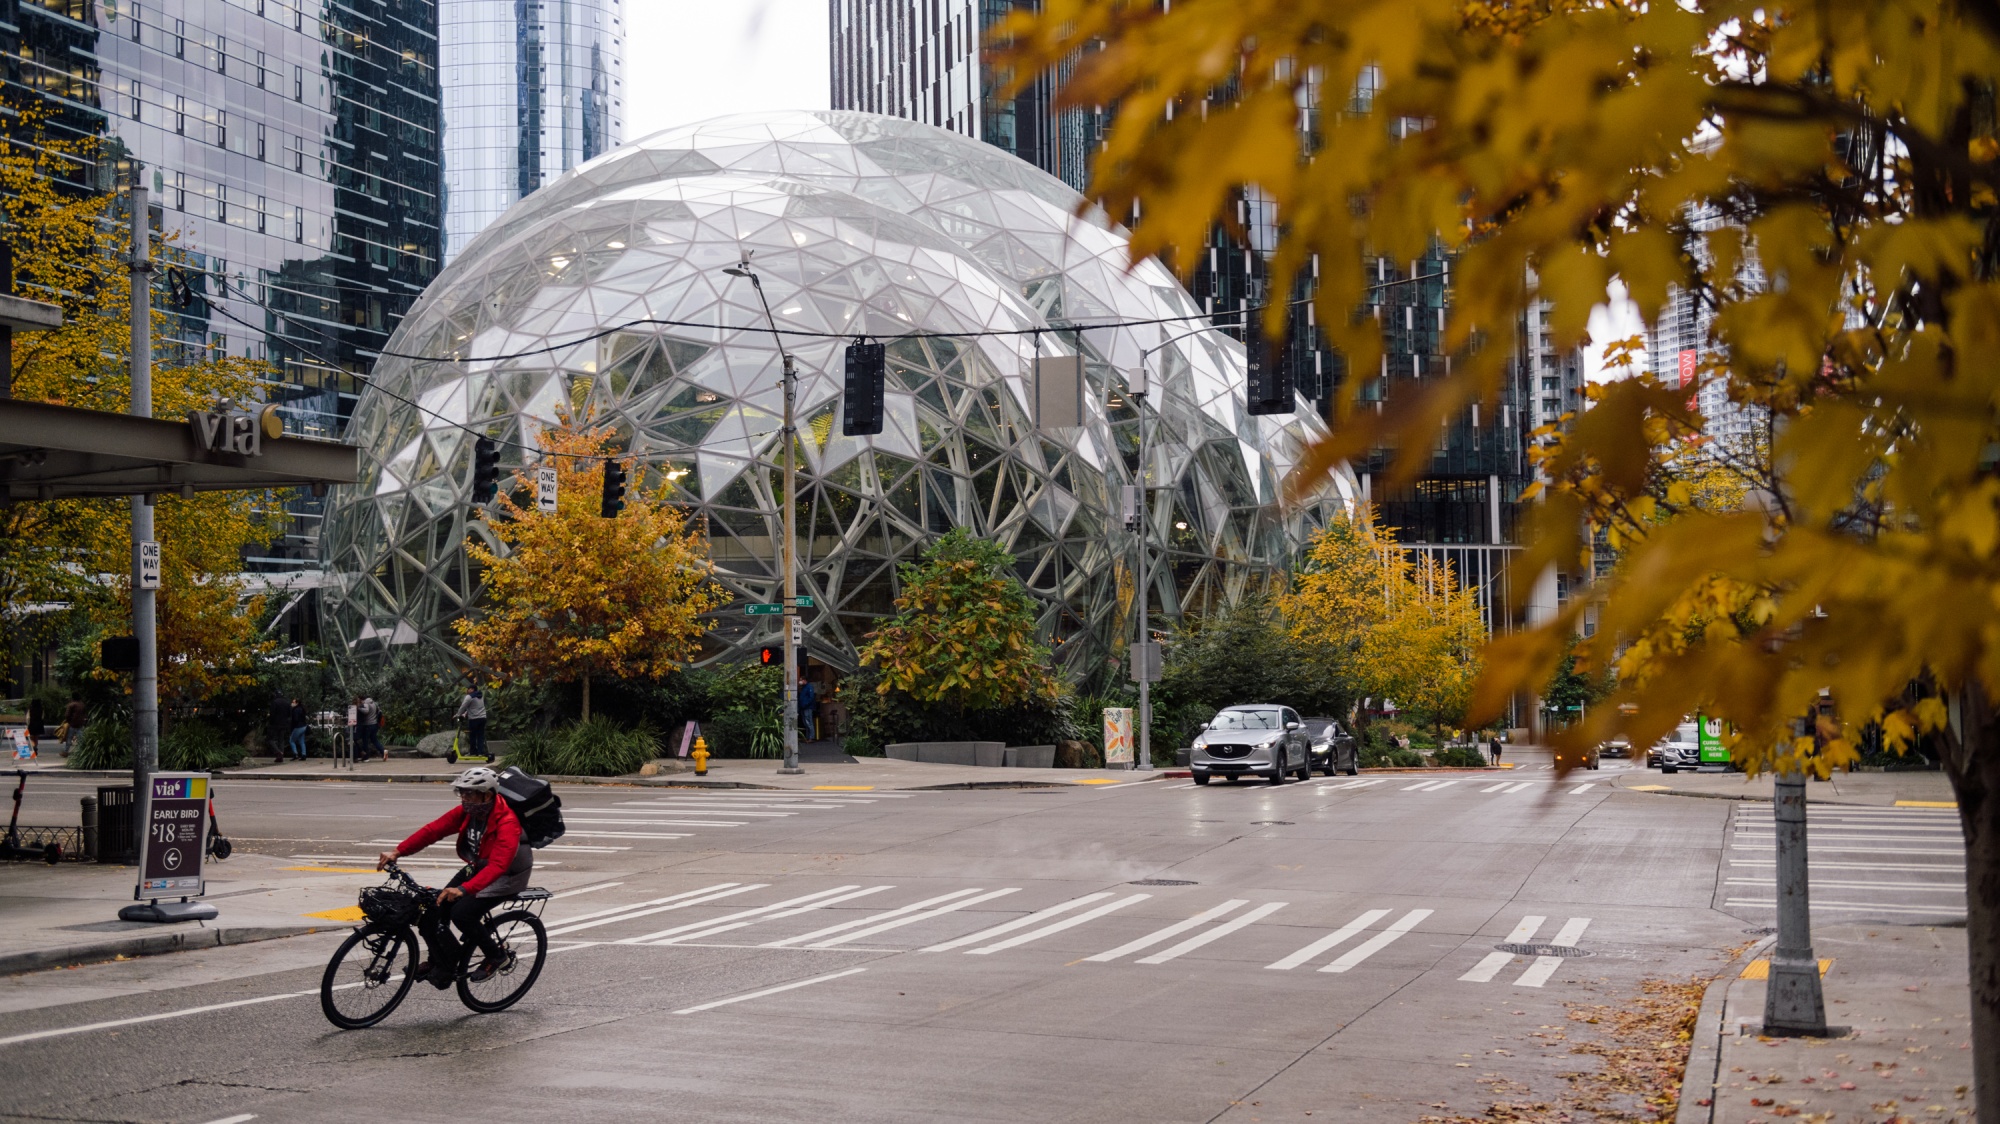 The Amazon Spheres, part of the Amazon headquarters campus, in Seattle.